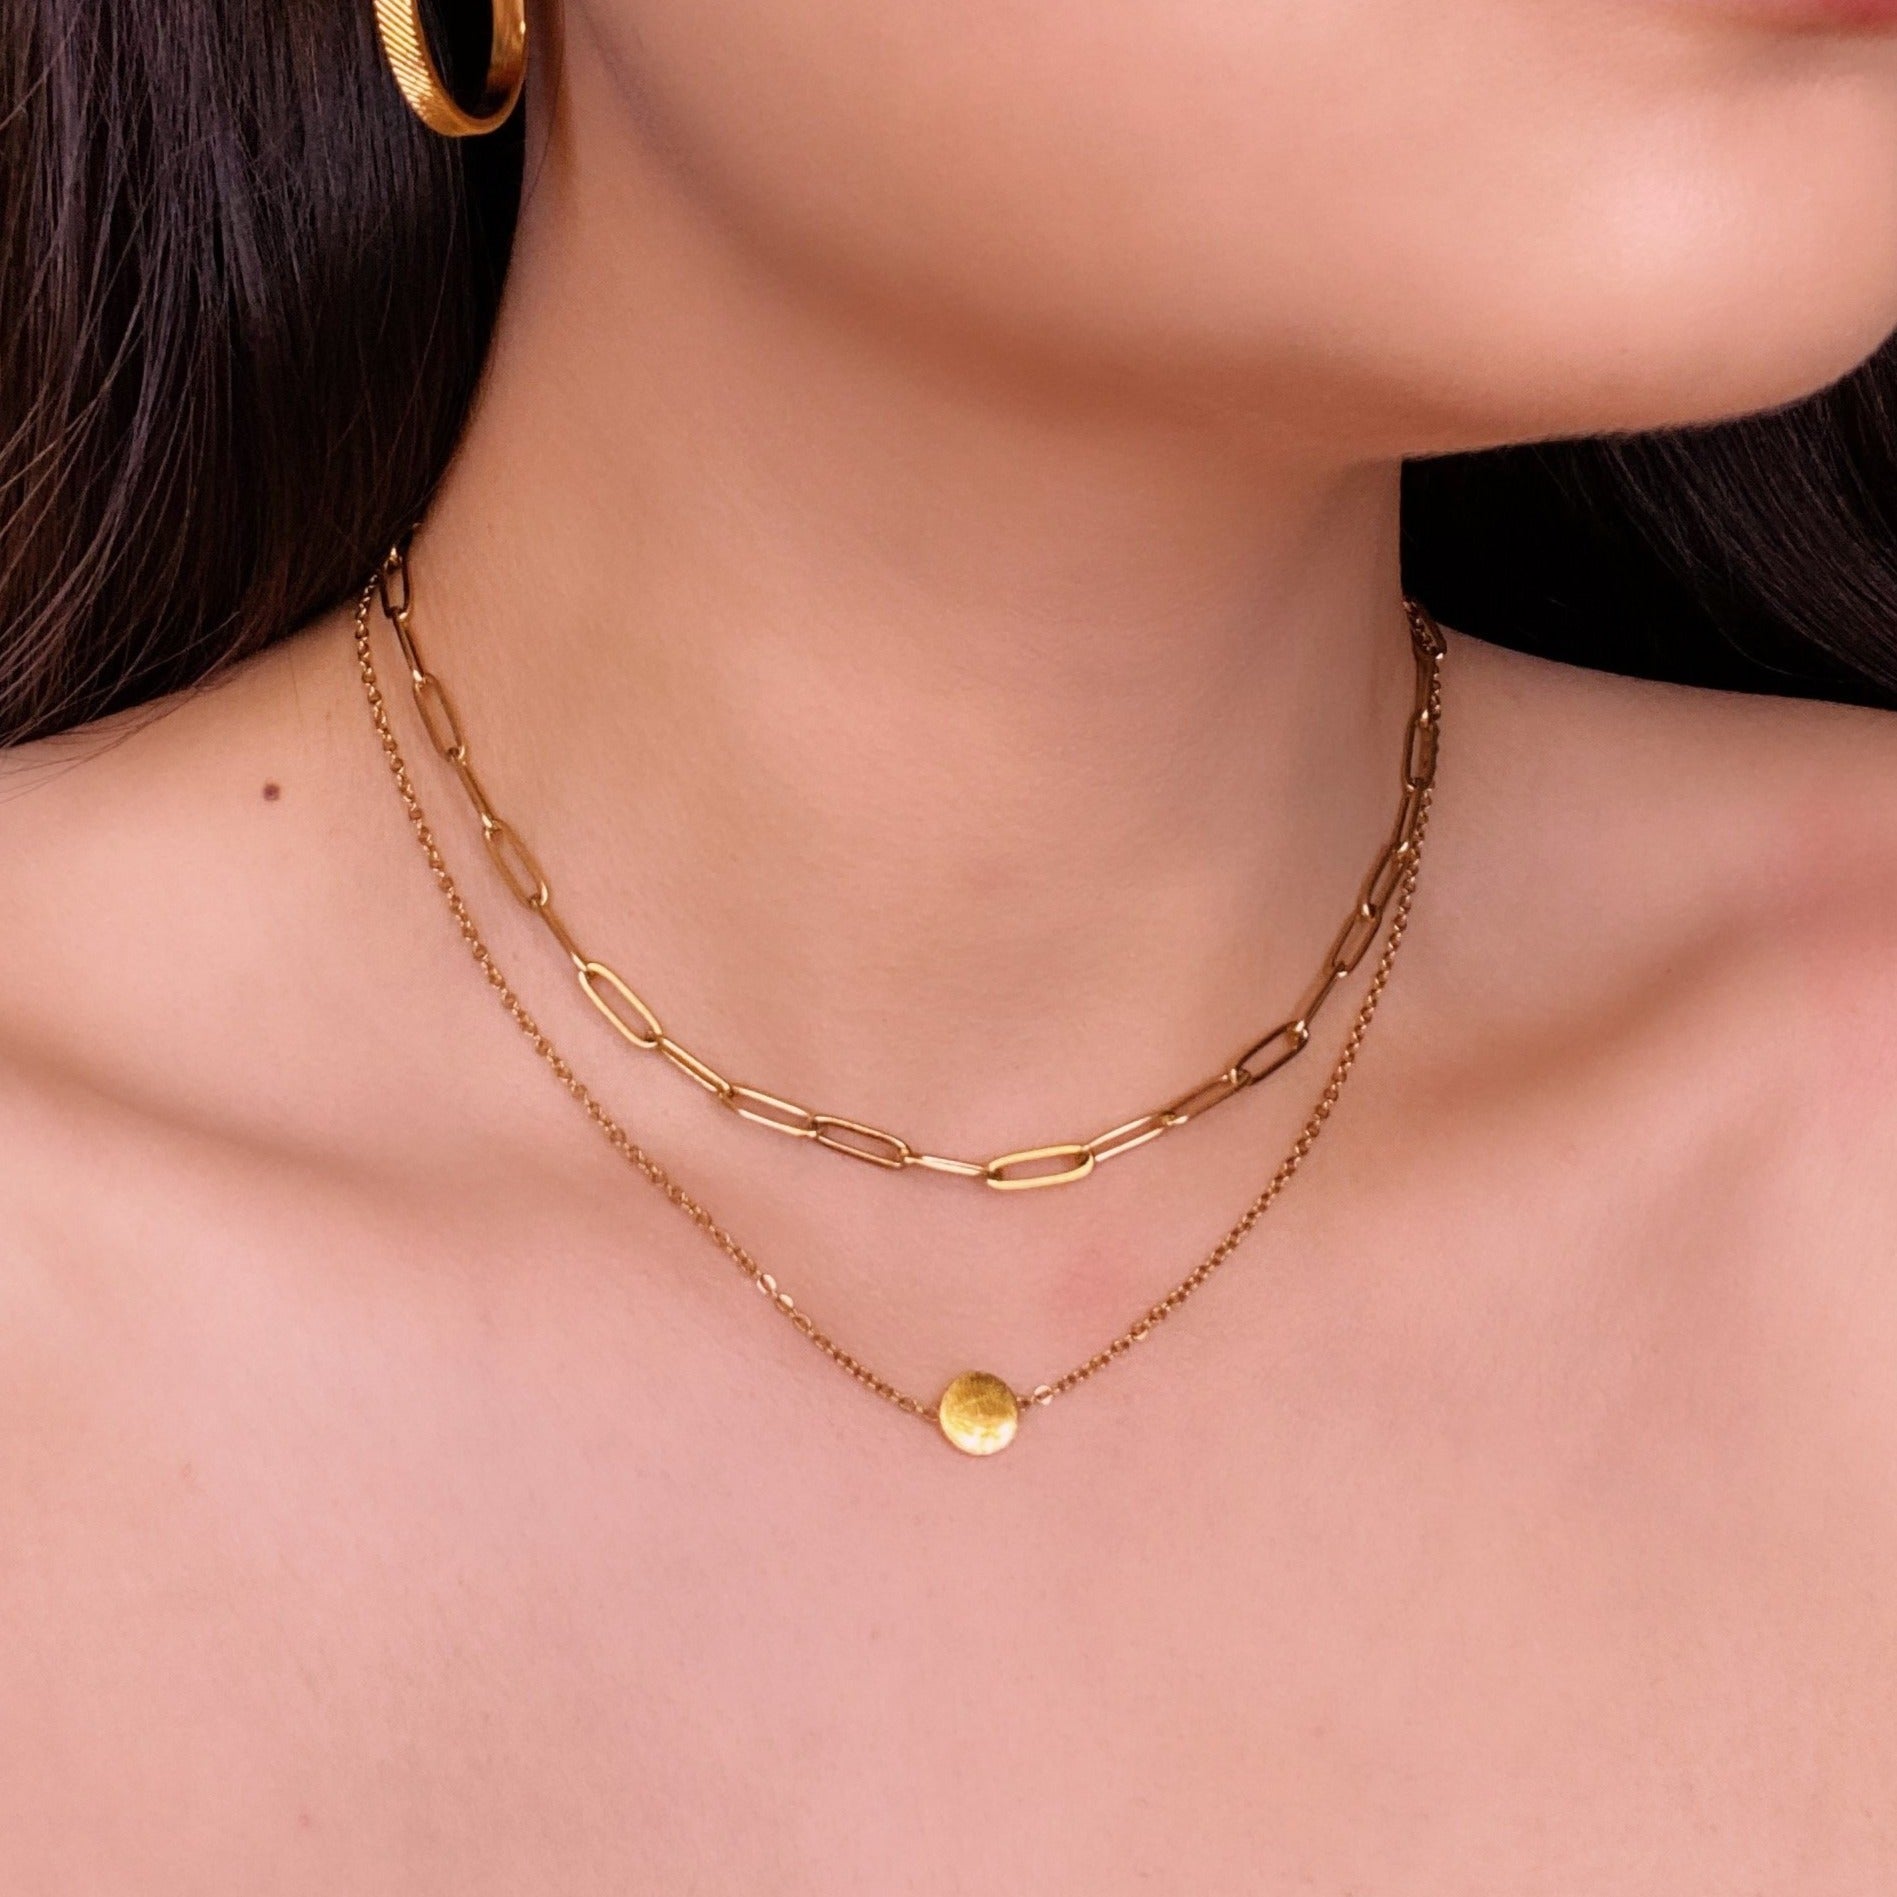 Paperlink Chain Gold Filled Necklace / Choker